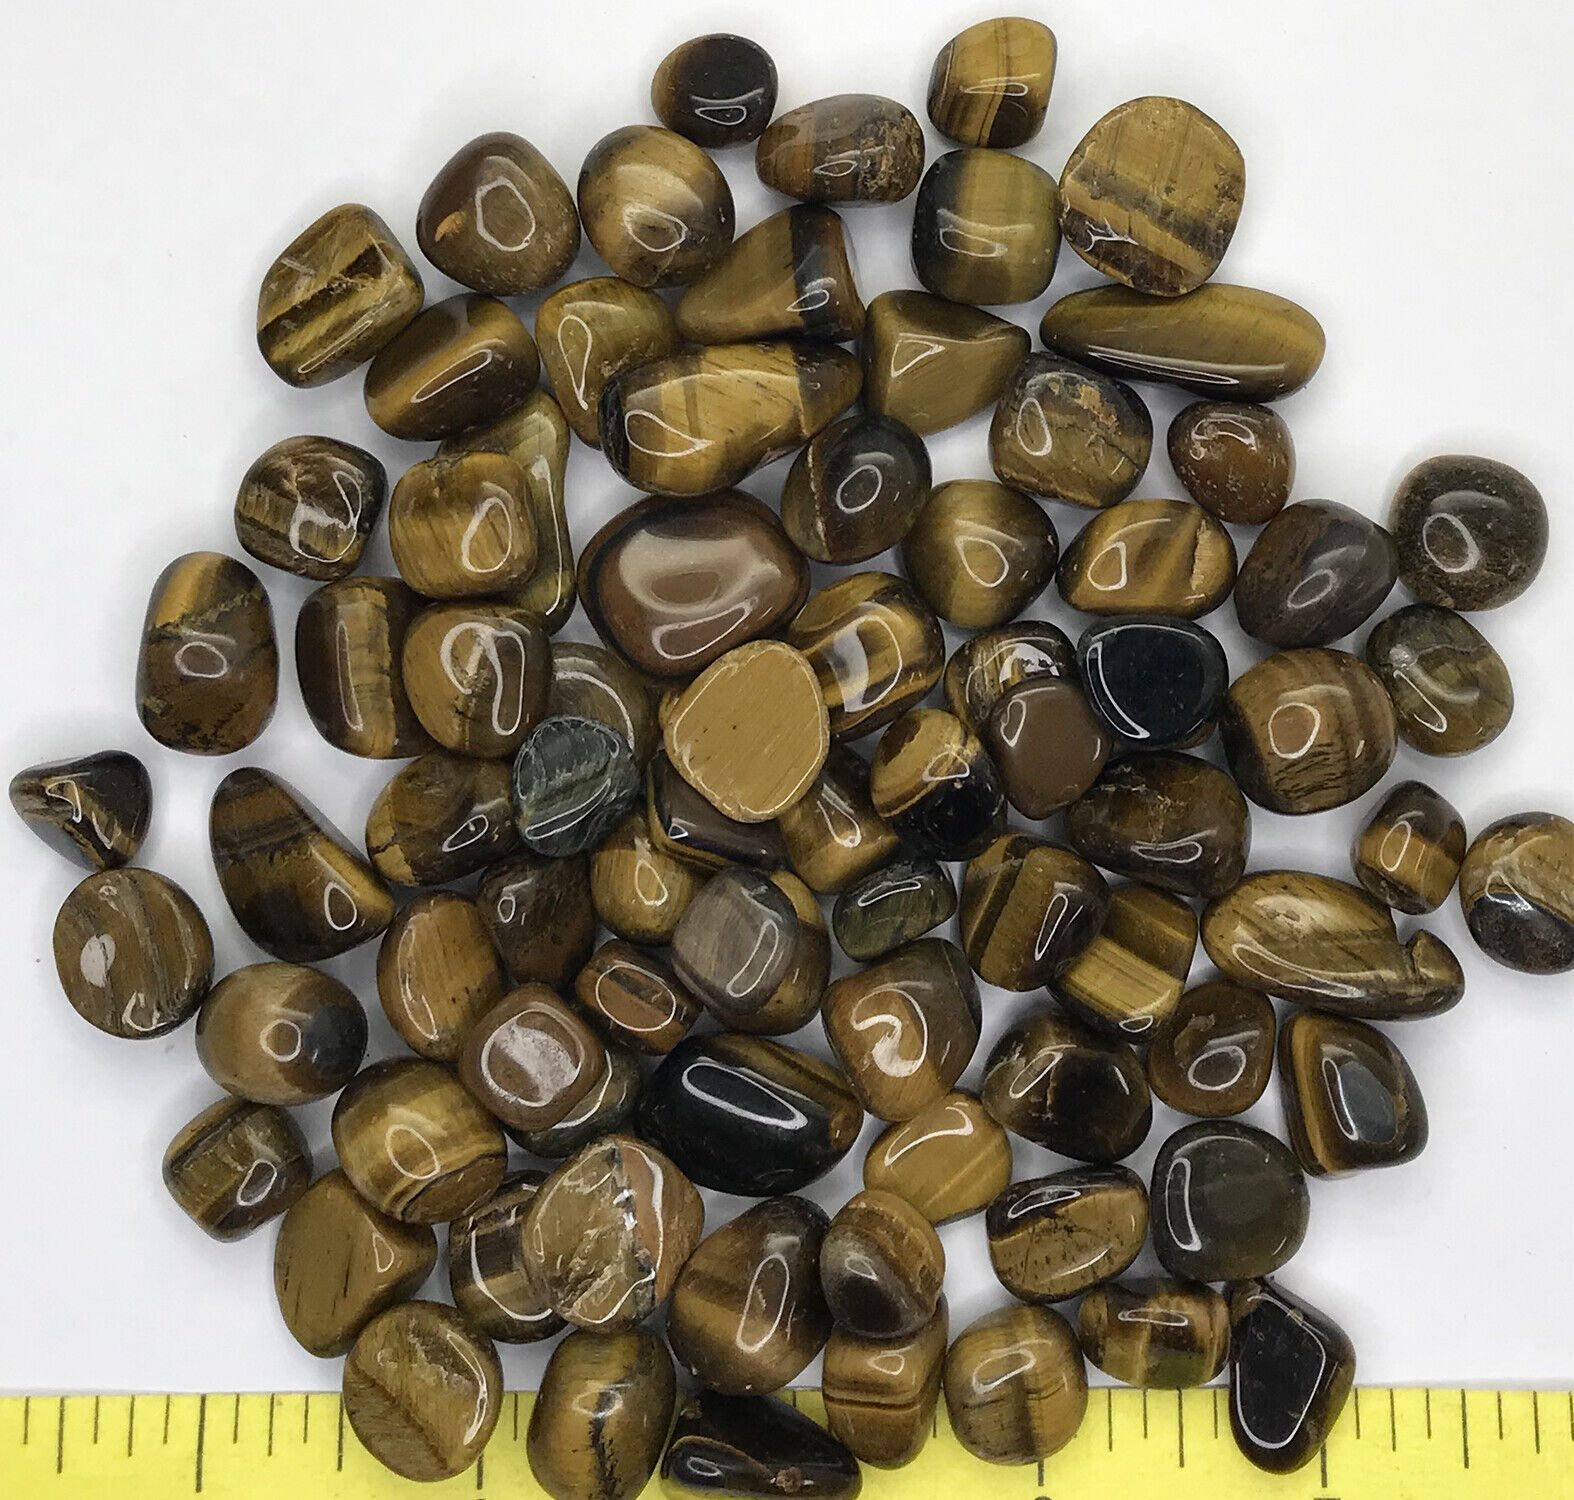 TIGER EYE GOLDEN Small to X-Large polished stones     1/2 lb